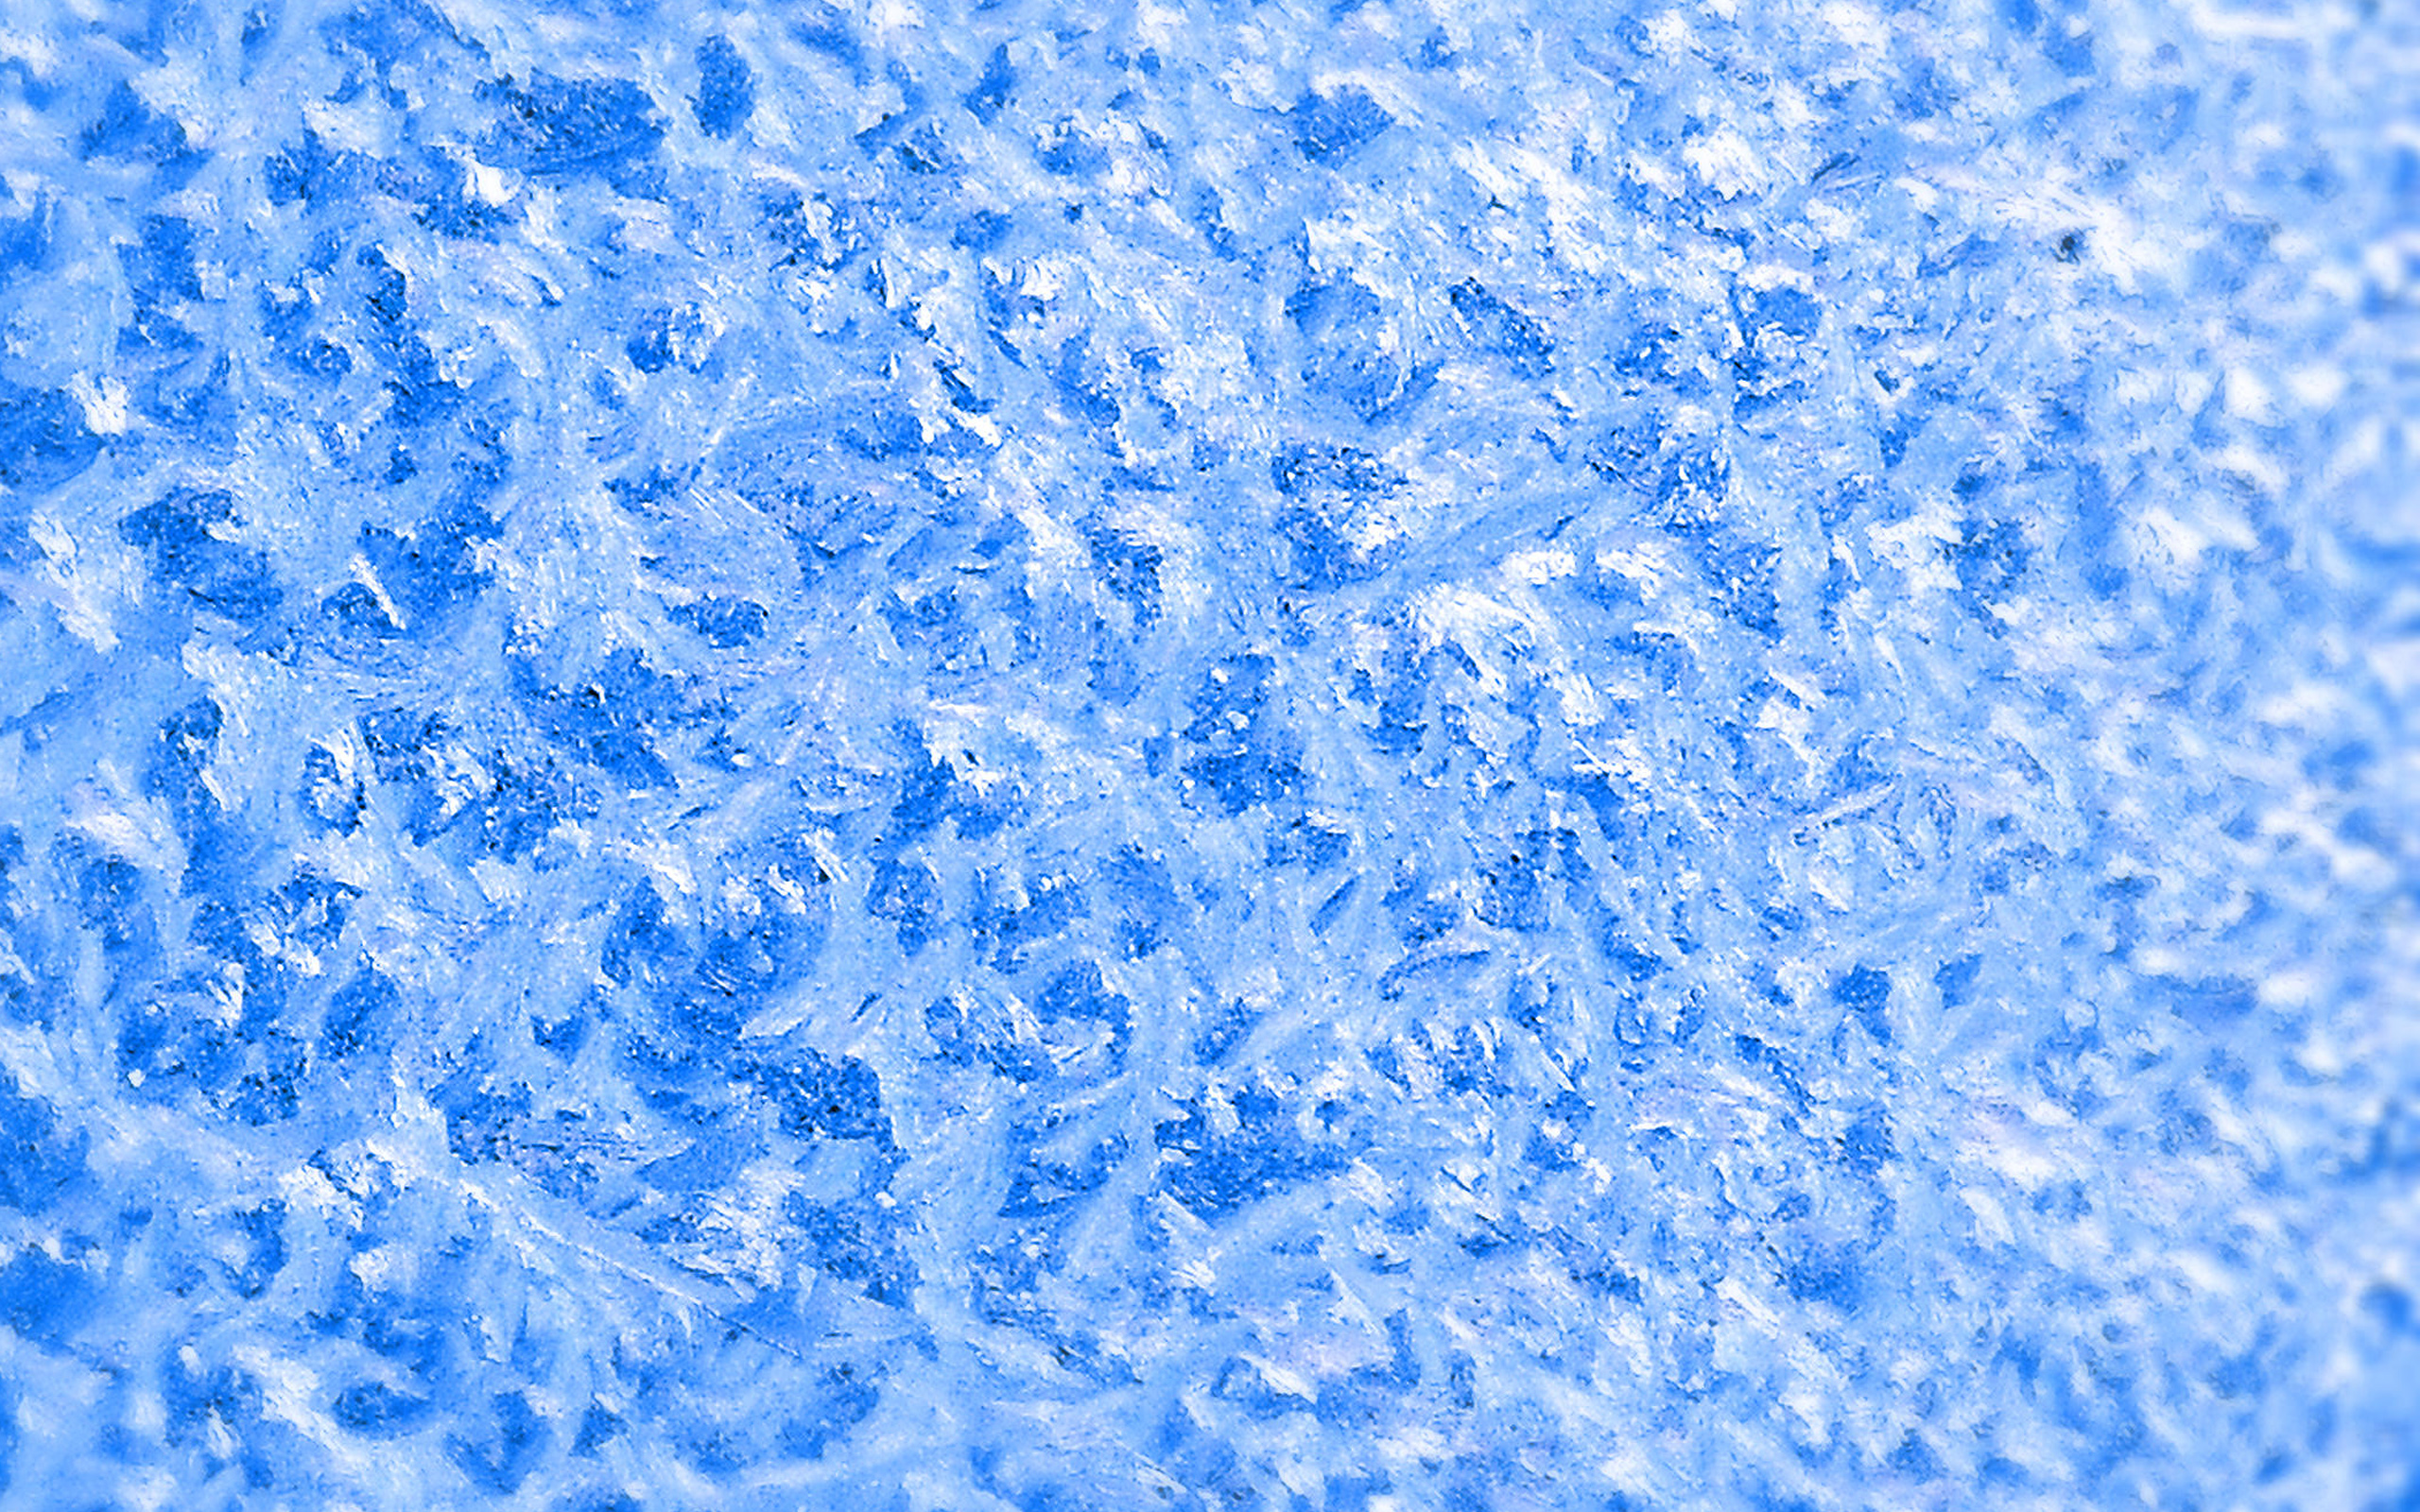 Download wallpaper blue frost texture, ice texture, winter texture, snow, winter, water for desktop with resolution 2560x1600. High Quality HD picture wallpaper